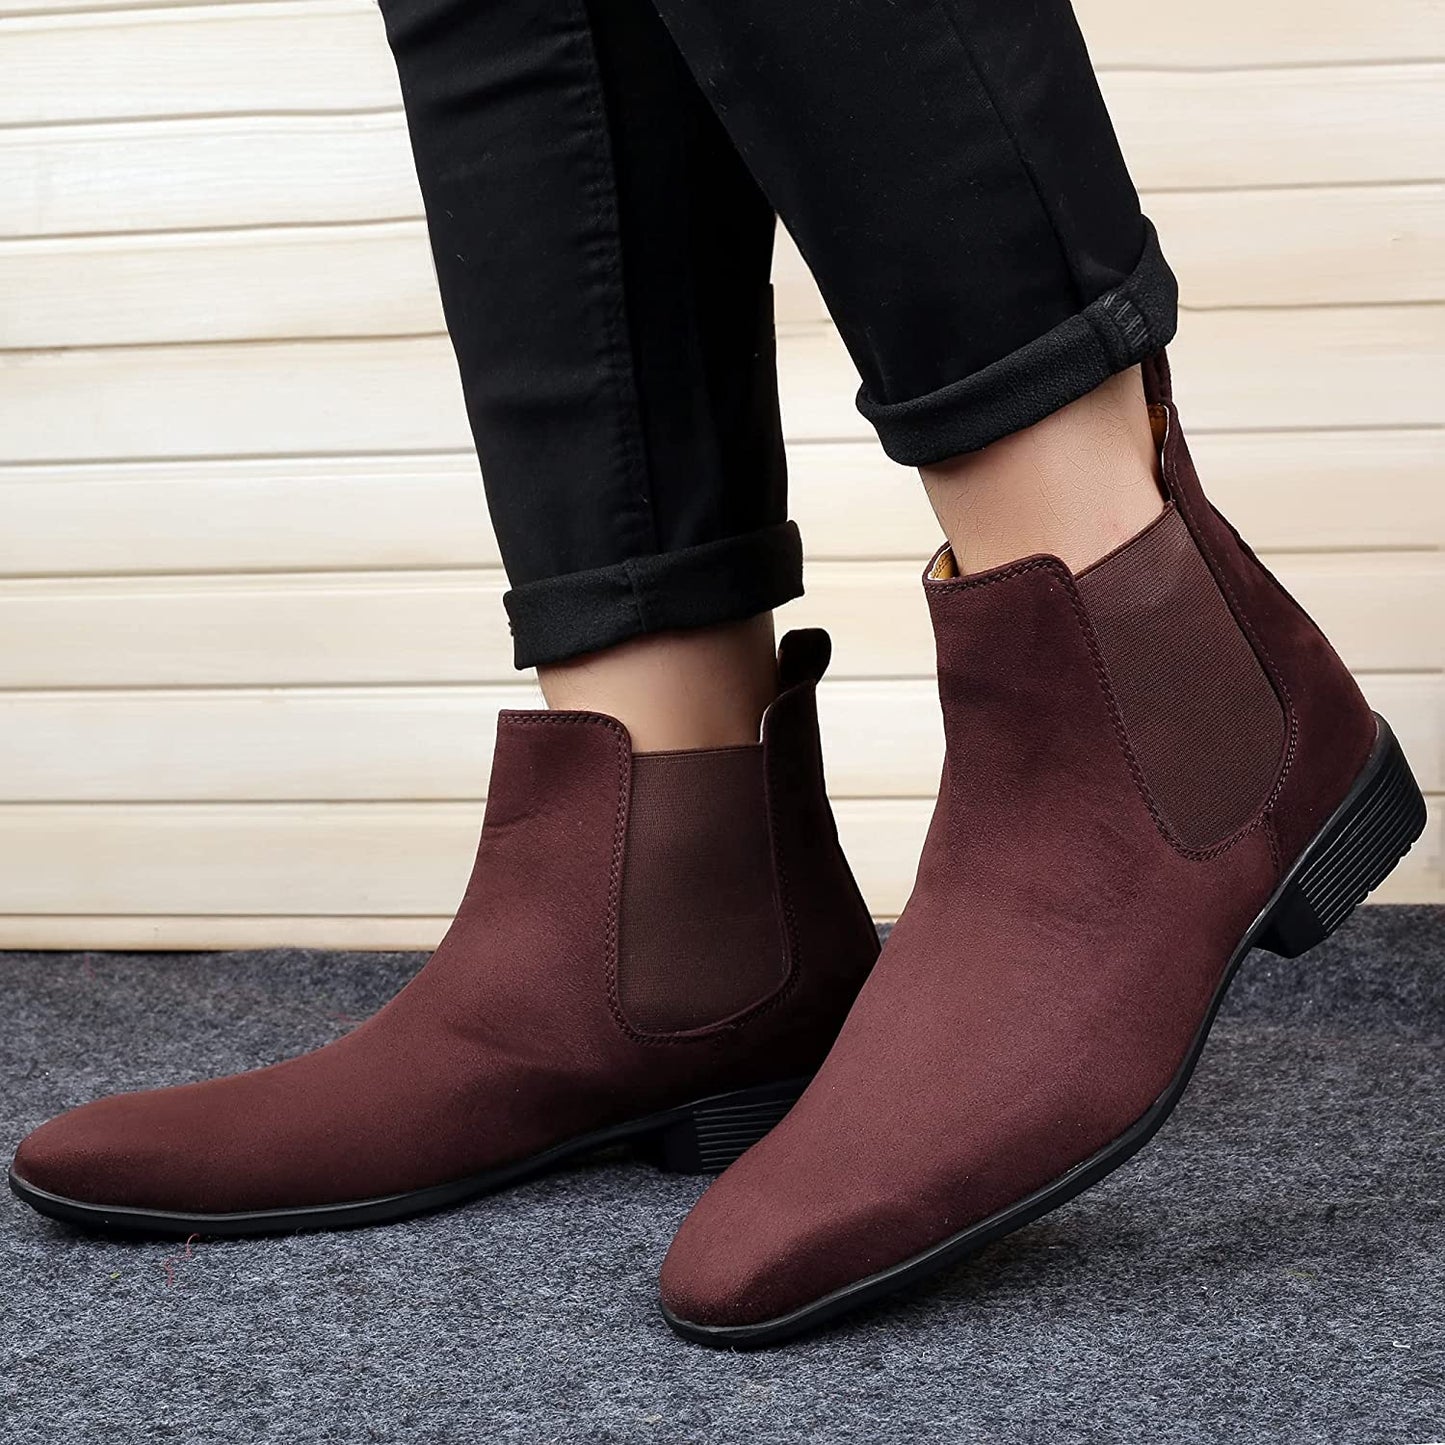 New Arrival Latest Suede Material Brown Casual Chelsea Boots For Men-JonasParamount